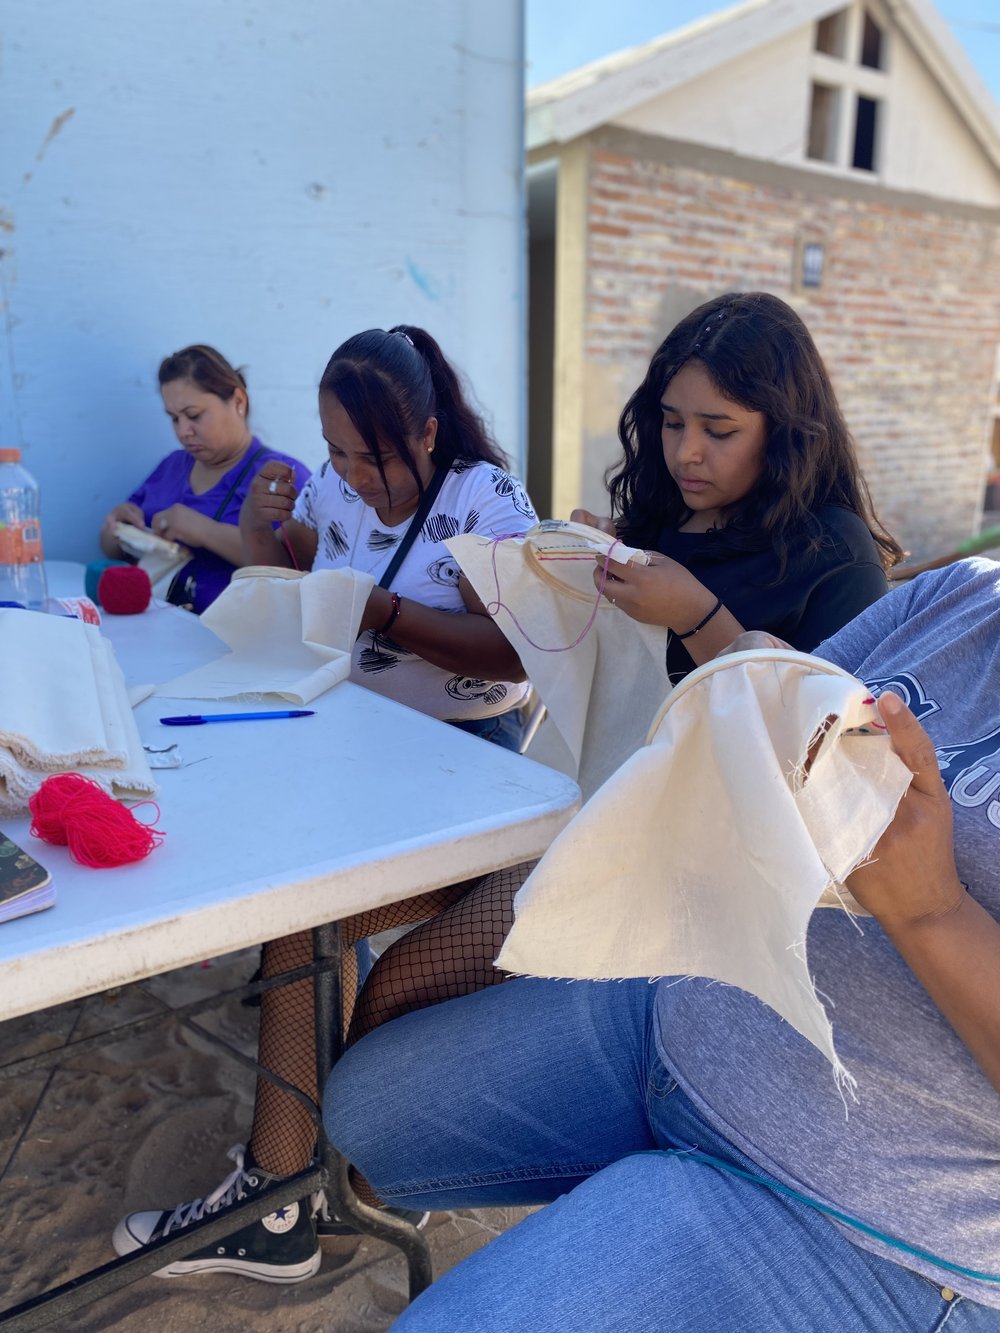 Women learn how to embroider